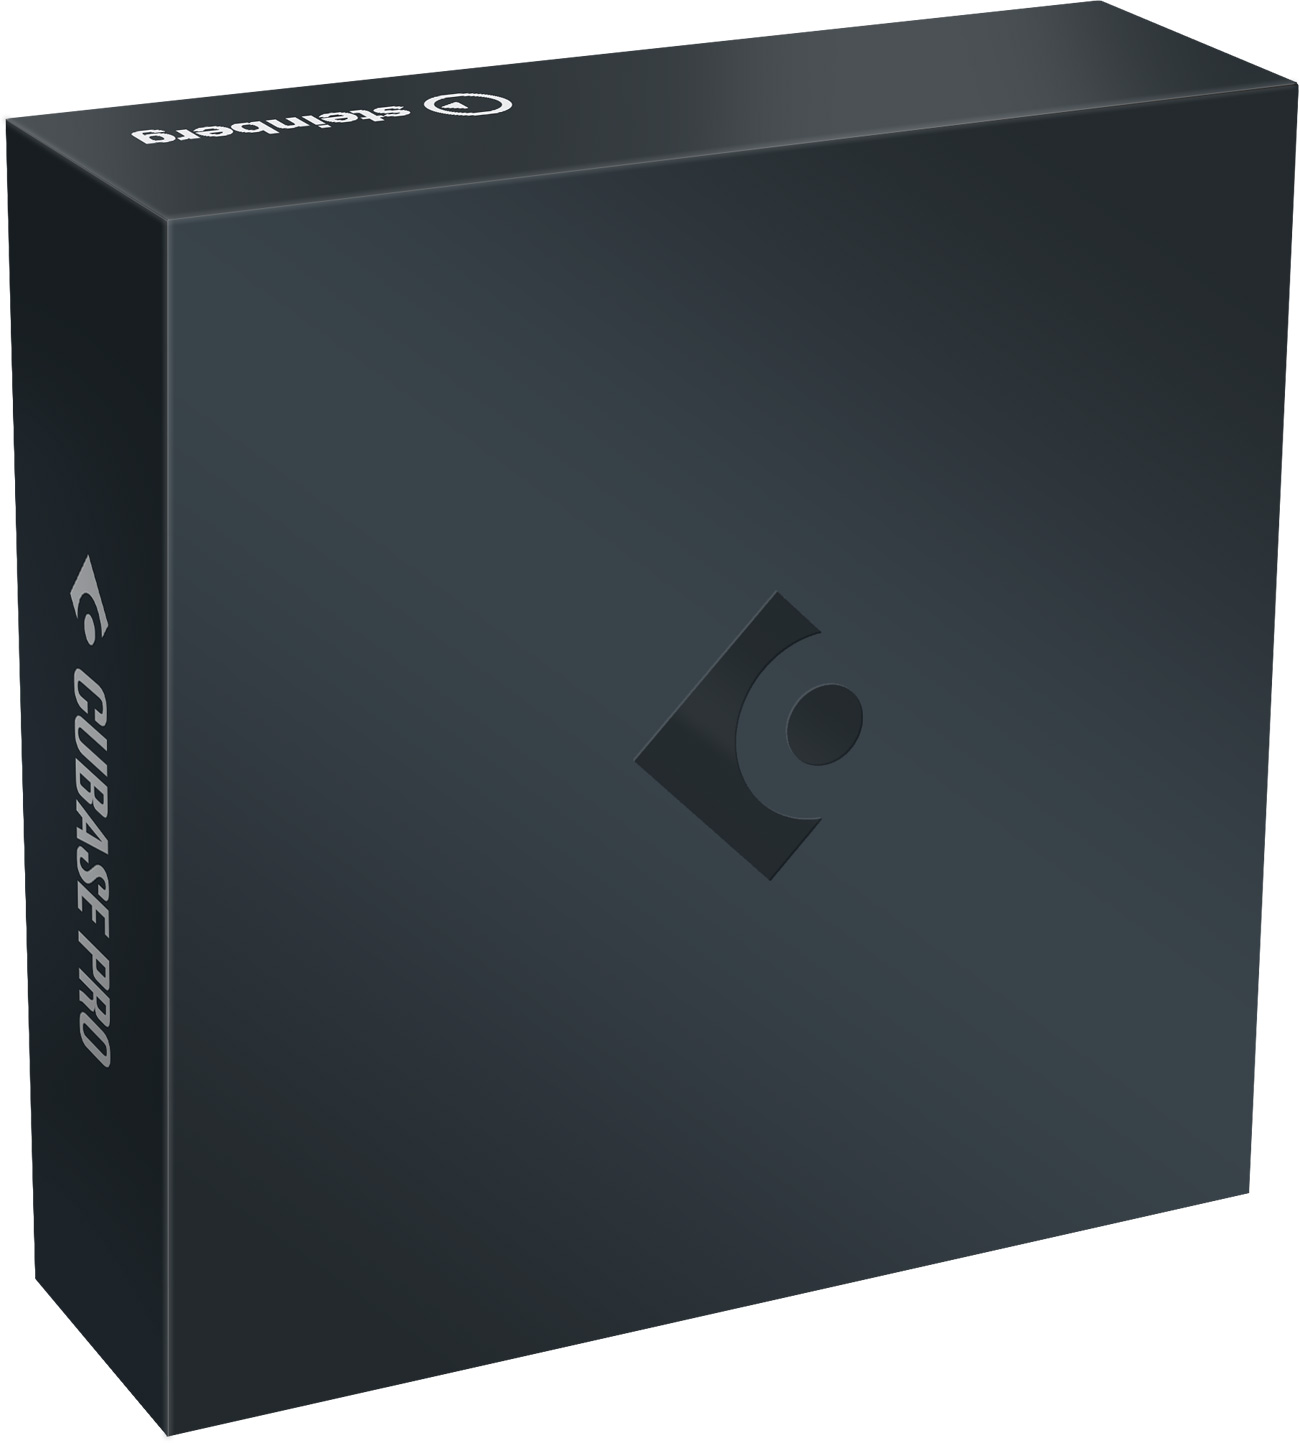 Cubase Pro 10.5 (free update to V12)